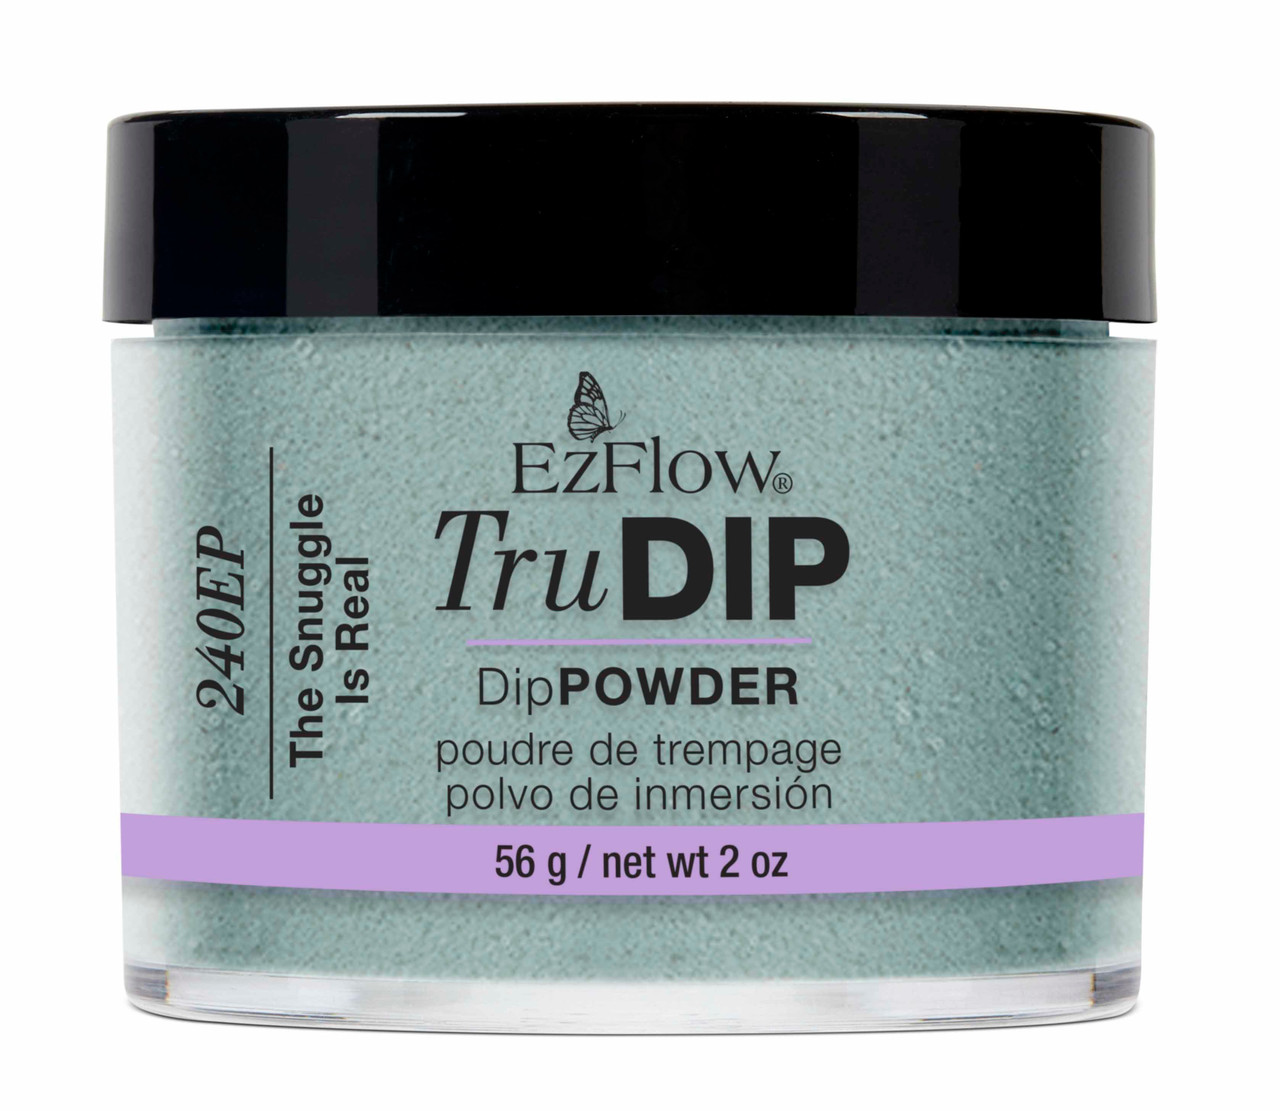 EZ TruDIP Dipping Powder The Snuggle is Real  - 2 oz